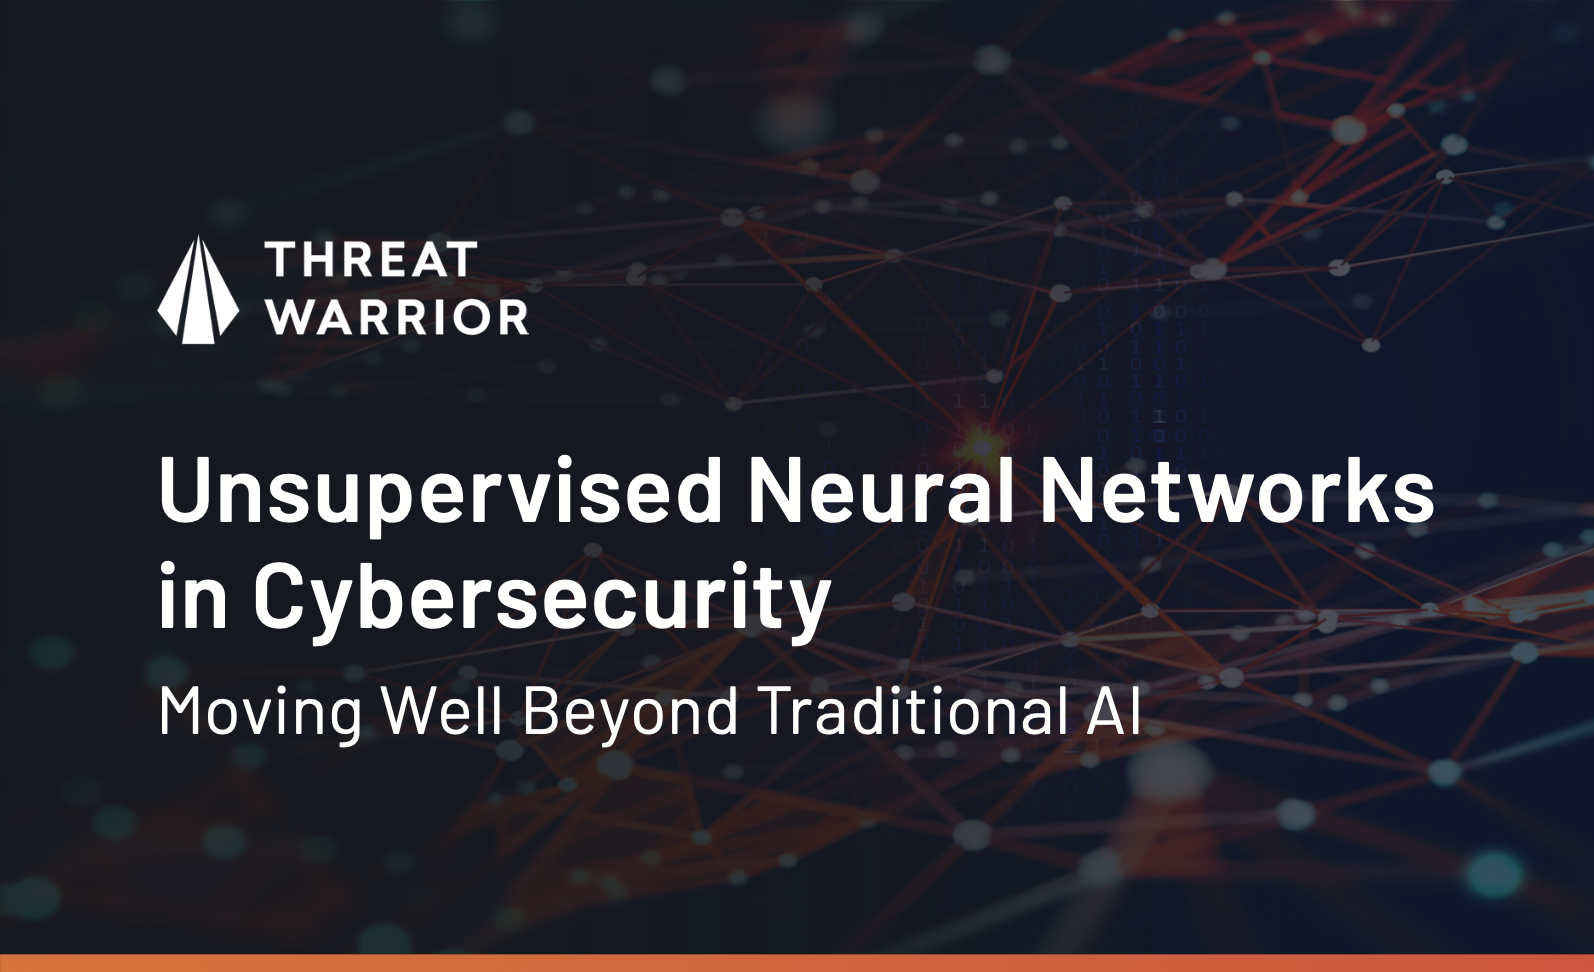 Unsupervised Neural Networks in Cybersecurity